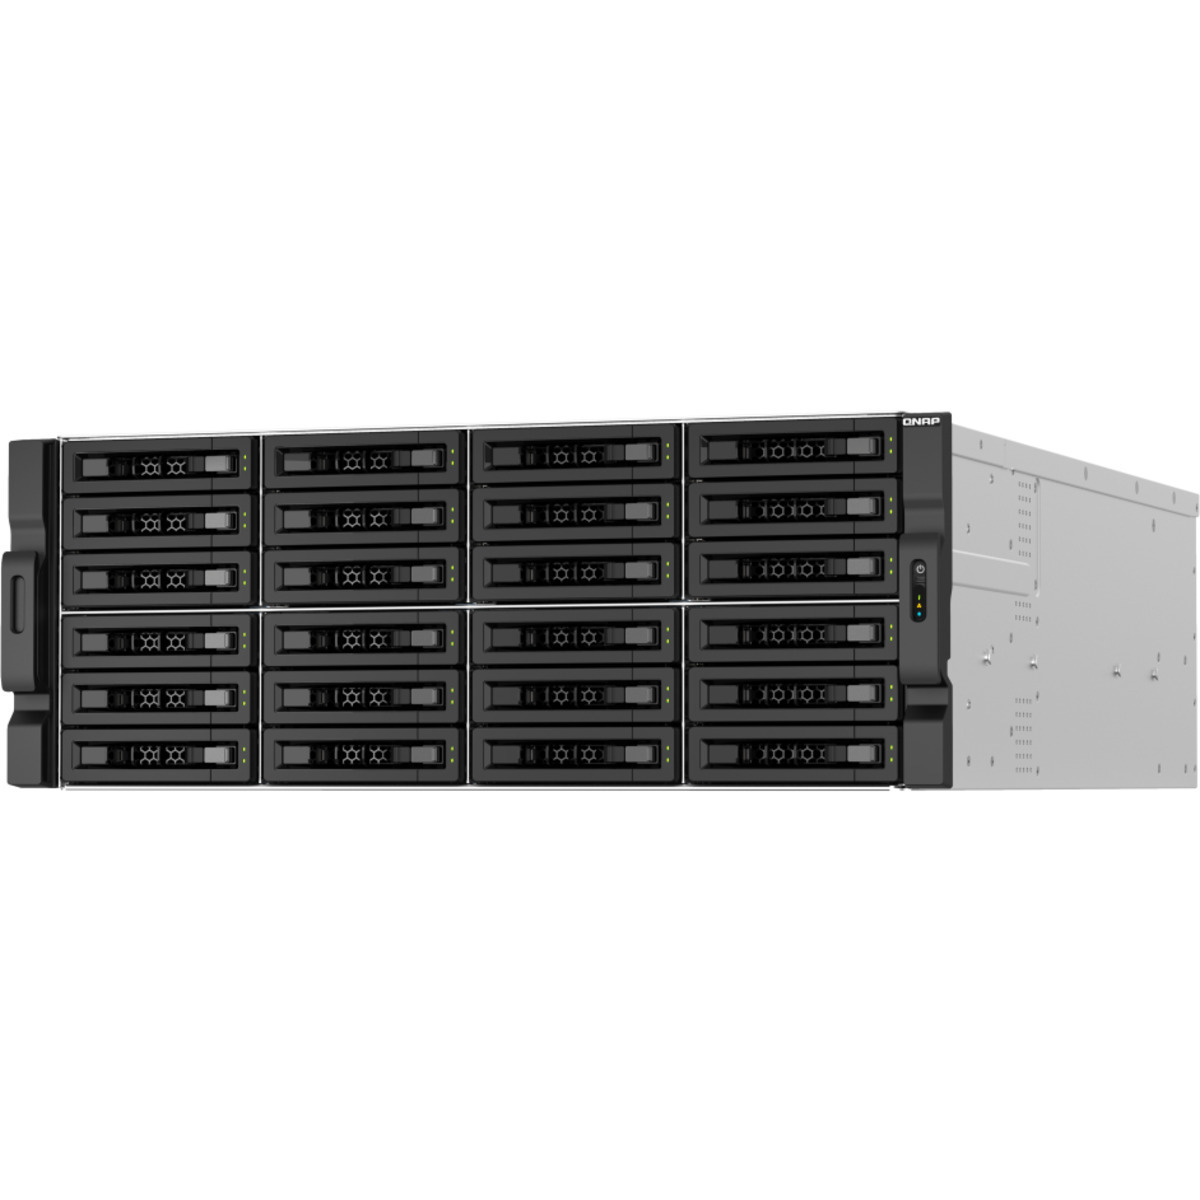 QNAP TS-h3087XU-RP E-2378 QuTS hero Edition 192tb 24+6-Bay RackMount Large Business / Enterprise NAS - Network Attached Storage Device 24x8tb Seagate IronWolf ST8000VN004 3.5 7200rpm SATA 6Gb/s HDD NAS Class Drives Installed - Burn-In Tested TS-h3087XU-RP E-2378 QuTS hero Edition